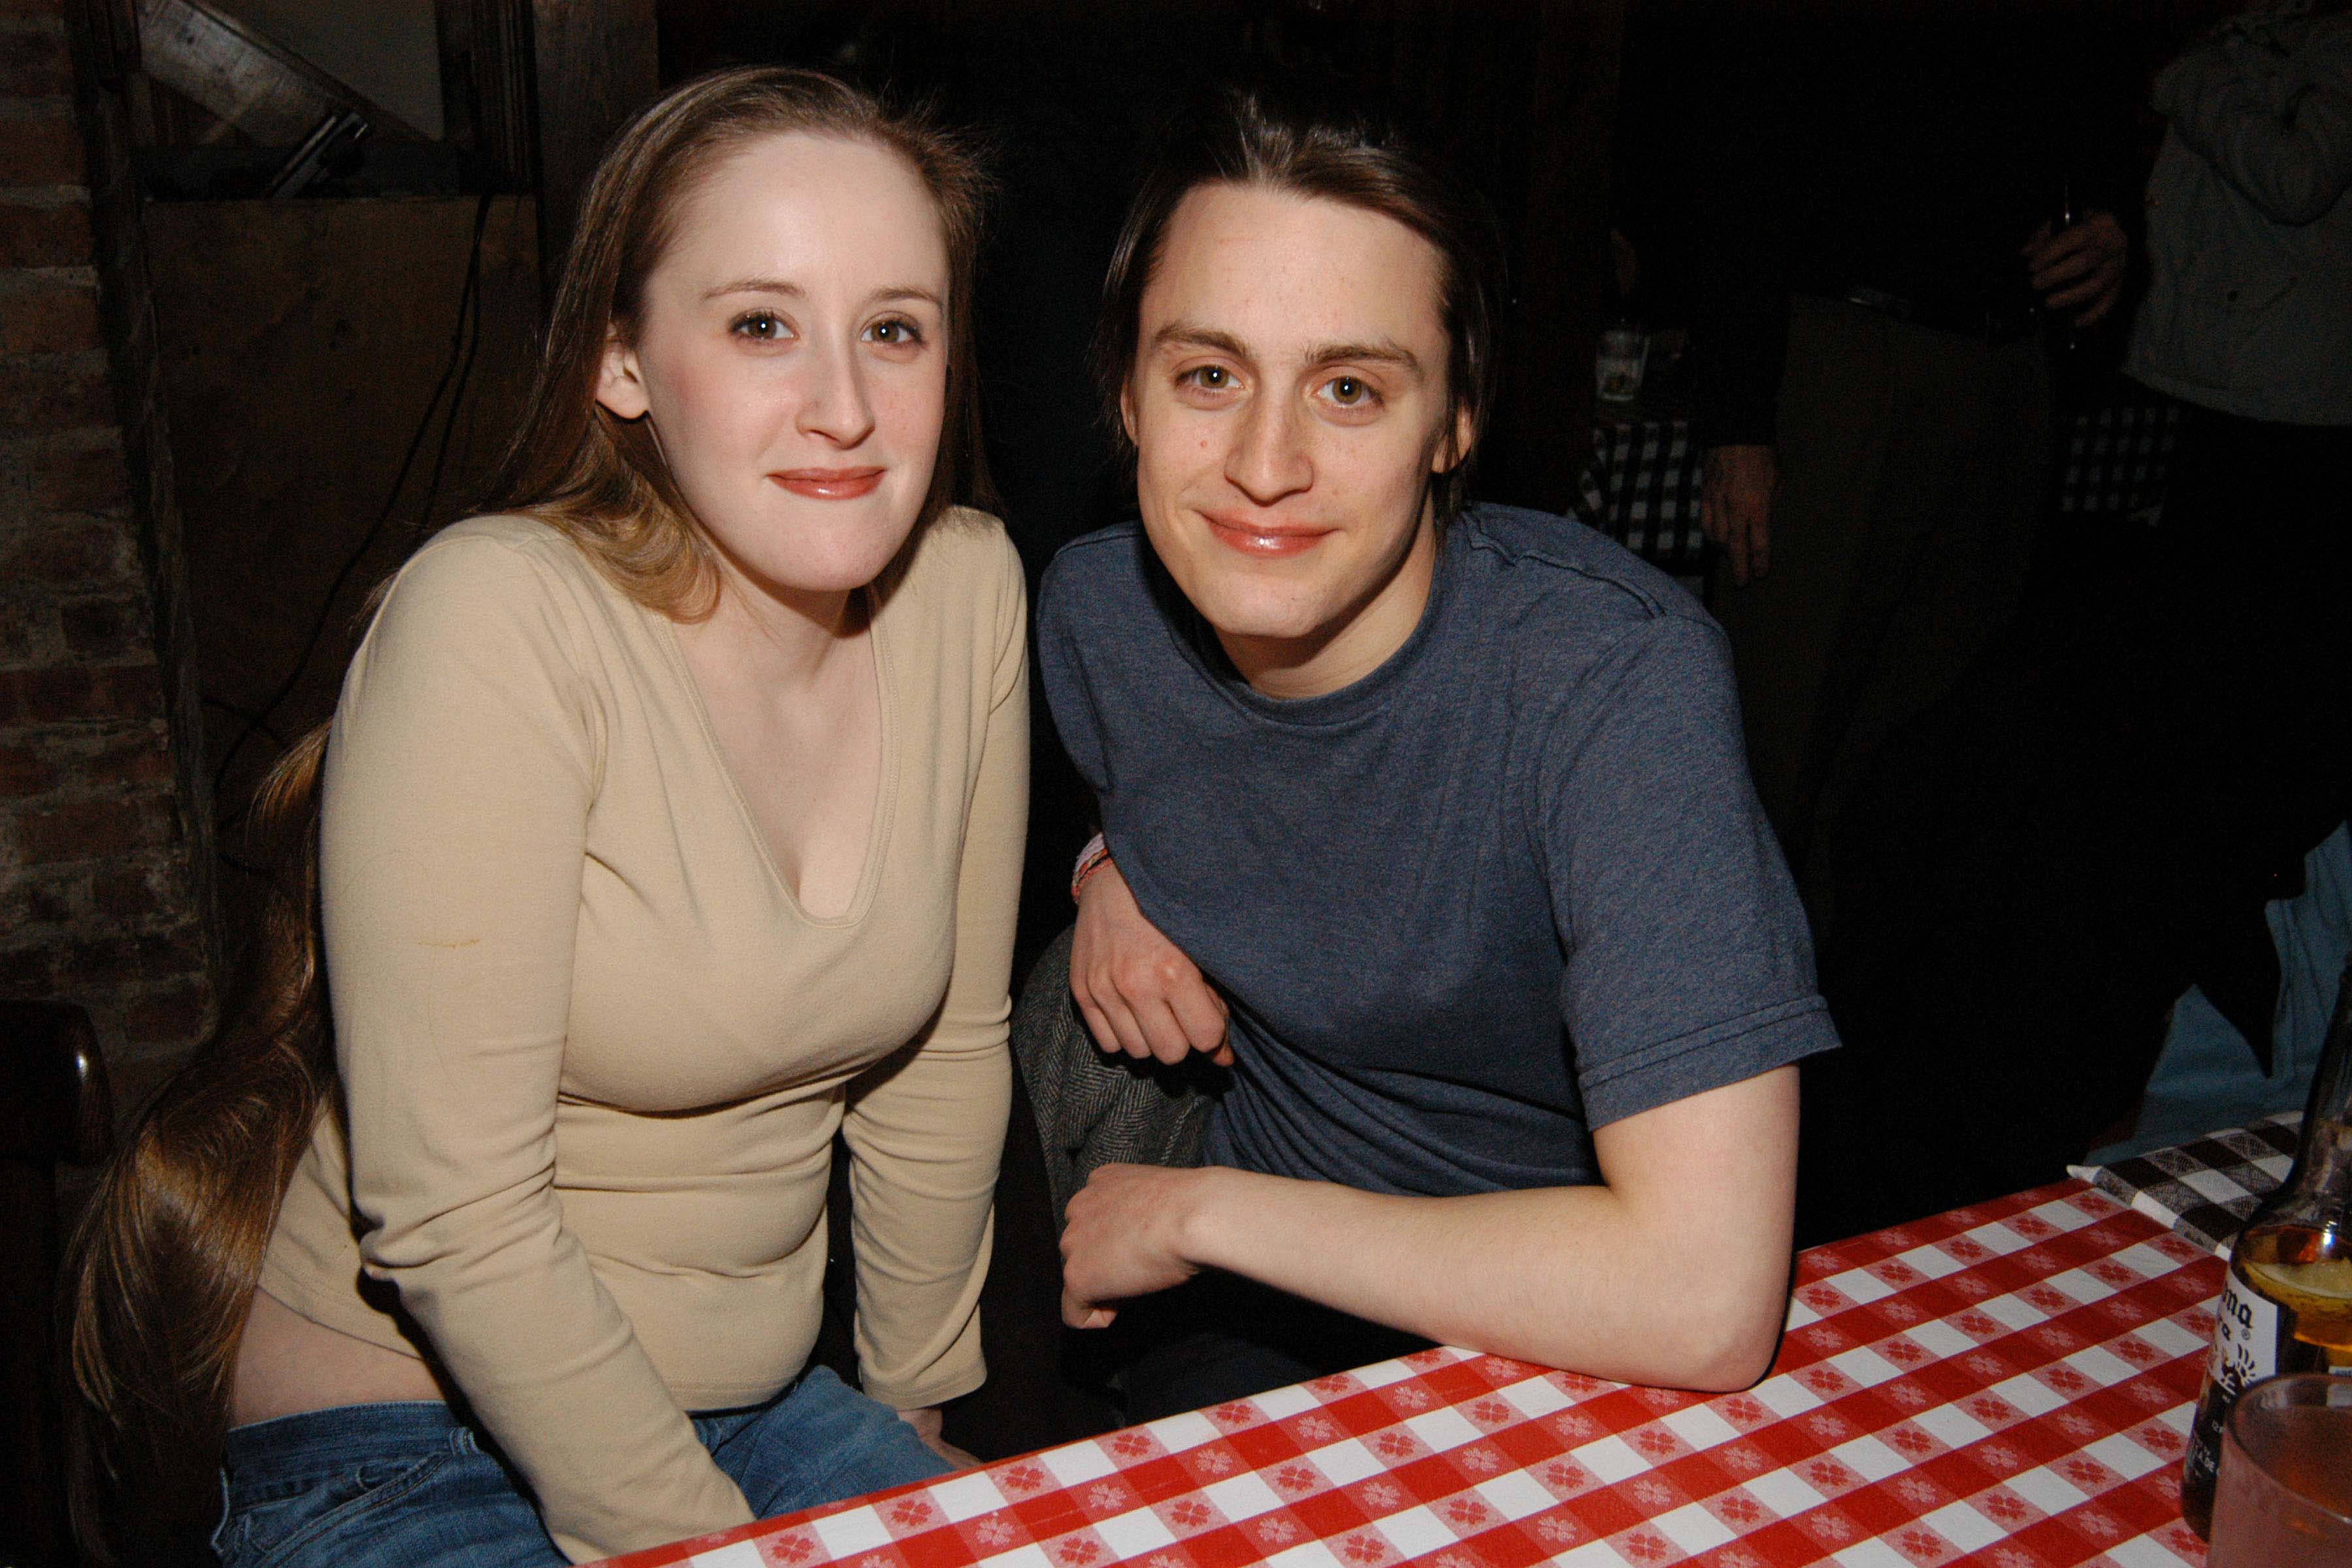 Quinn Culkin and Kieran Culkin attend OPENING NIGHT PARTY FOR Second Stage Theatre’s production of Theresa Rebeck’s THE SCENE on January 11, 2007 in New York City. | Source: Getty Images